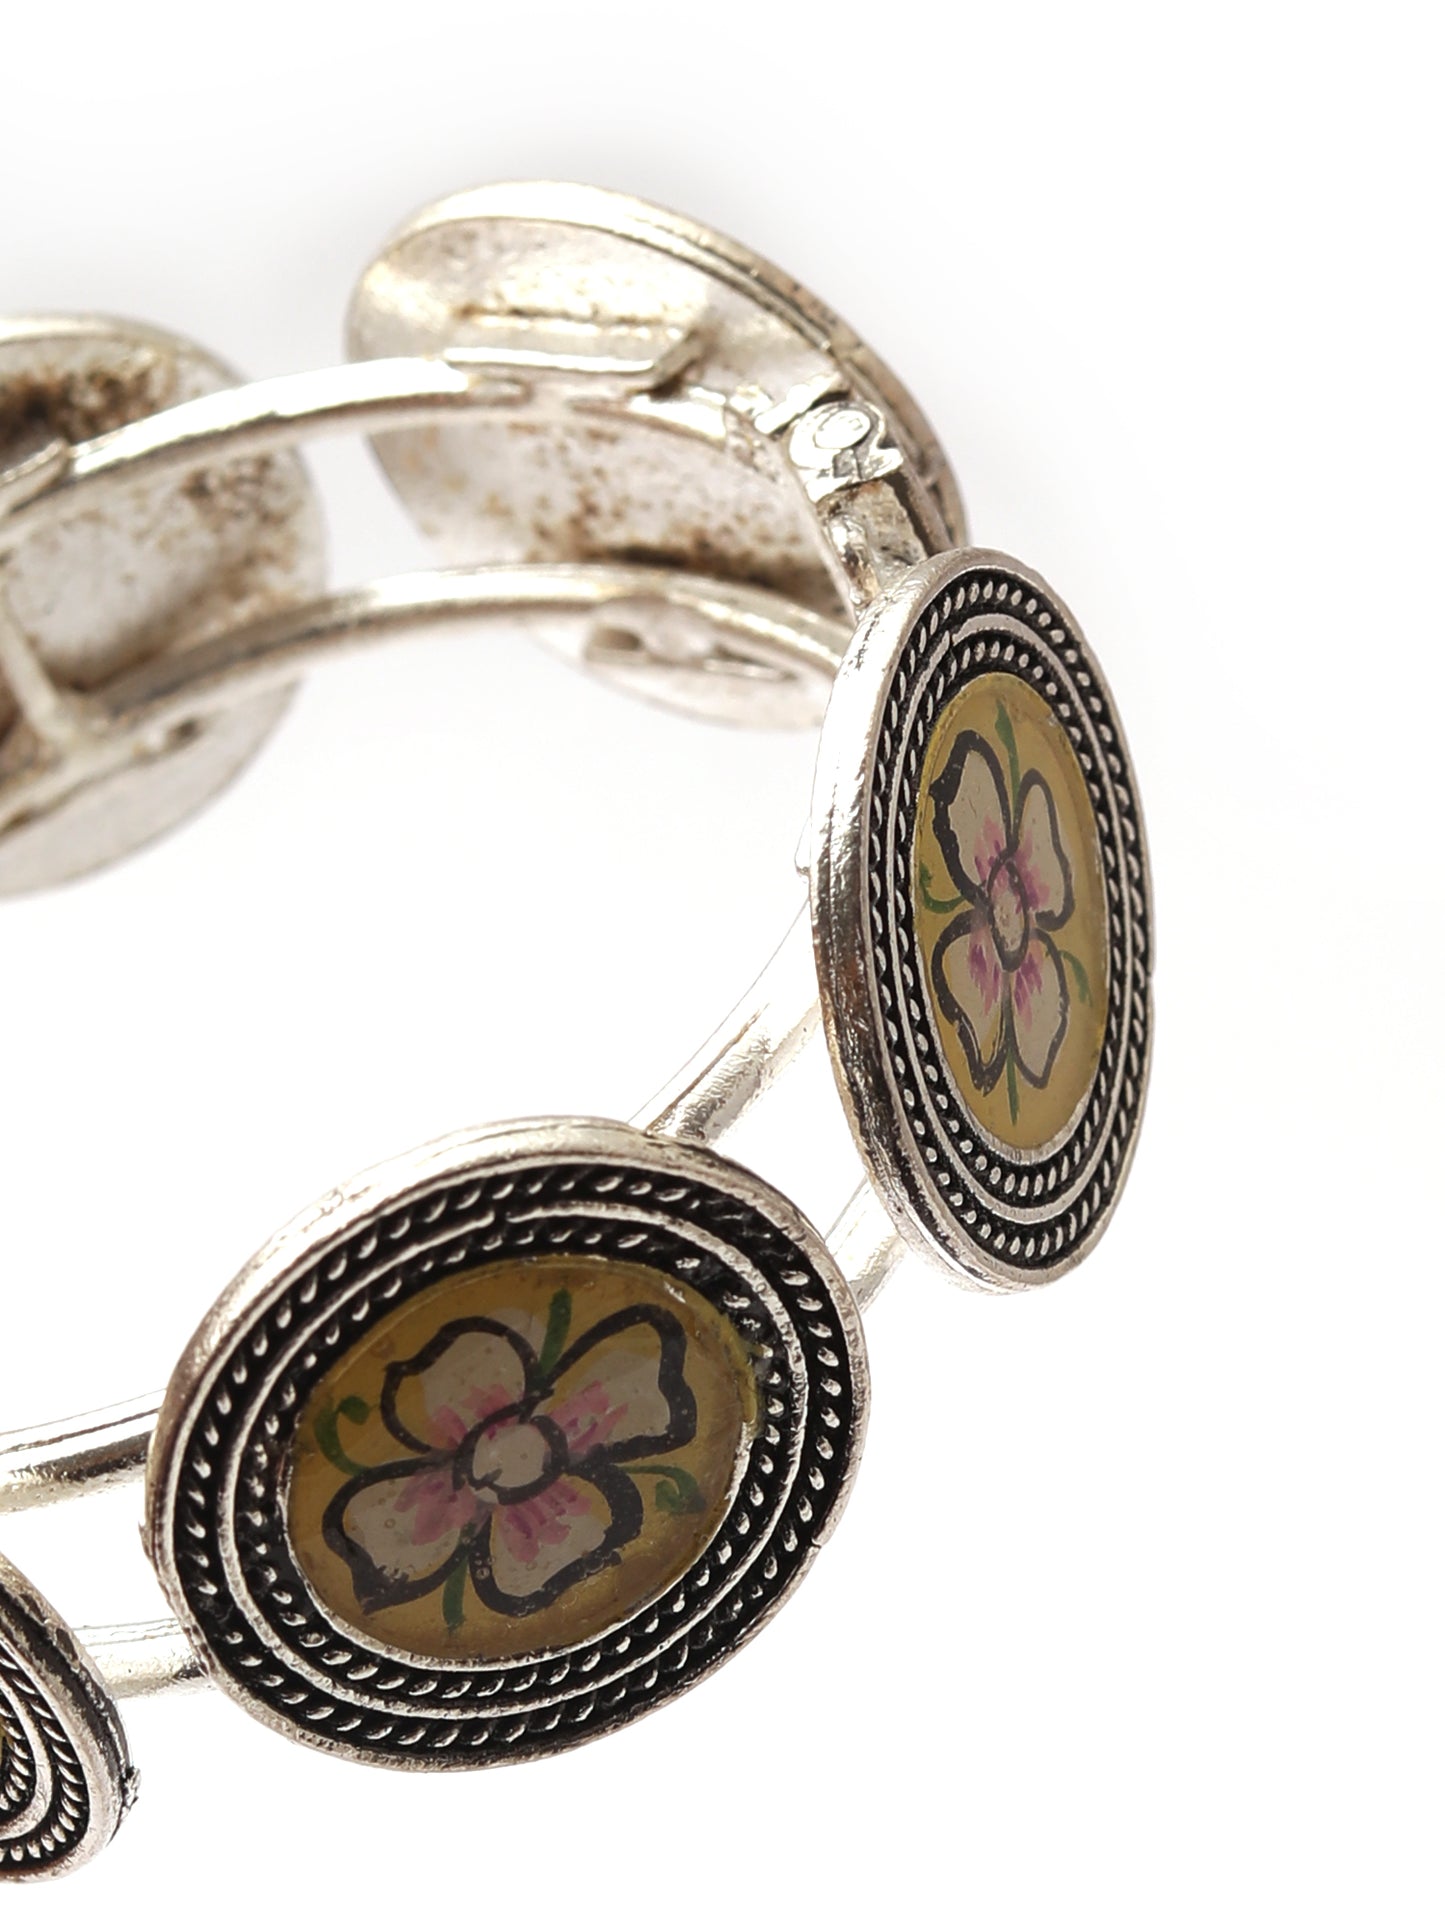 The Hand Painted Lilies Bracelet